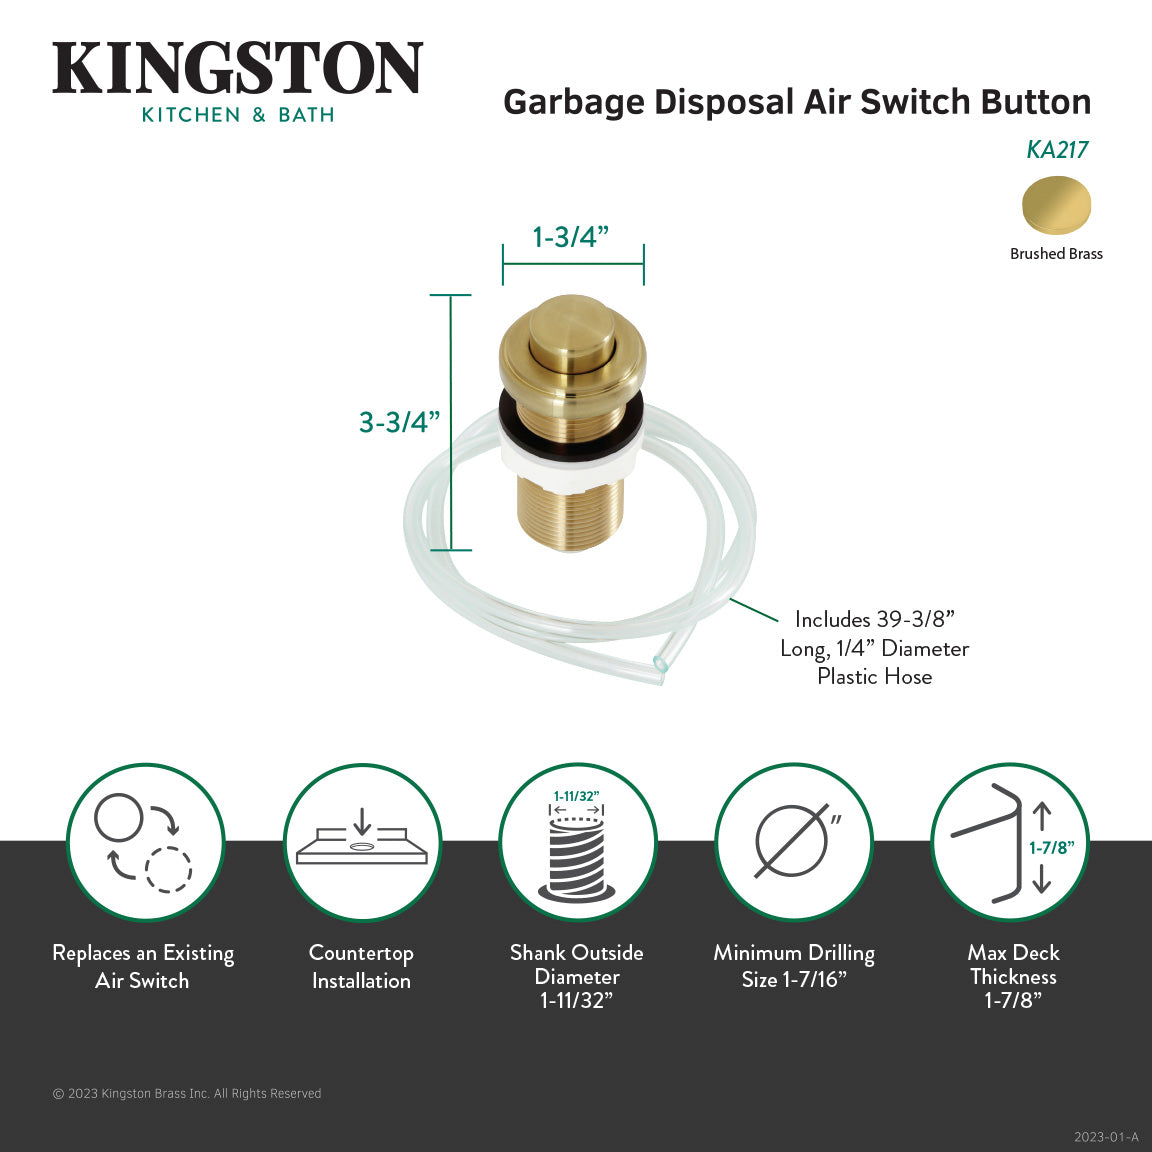 Trimscape KA217 Garbage Disposal Air Switch Button, Brushed Brass